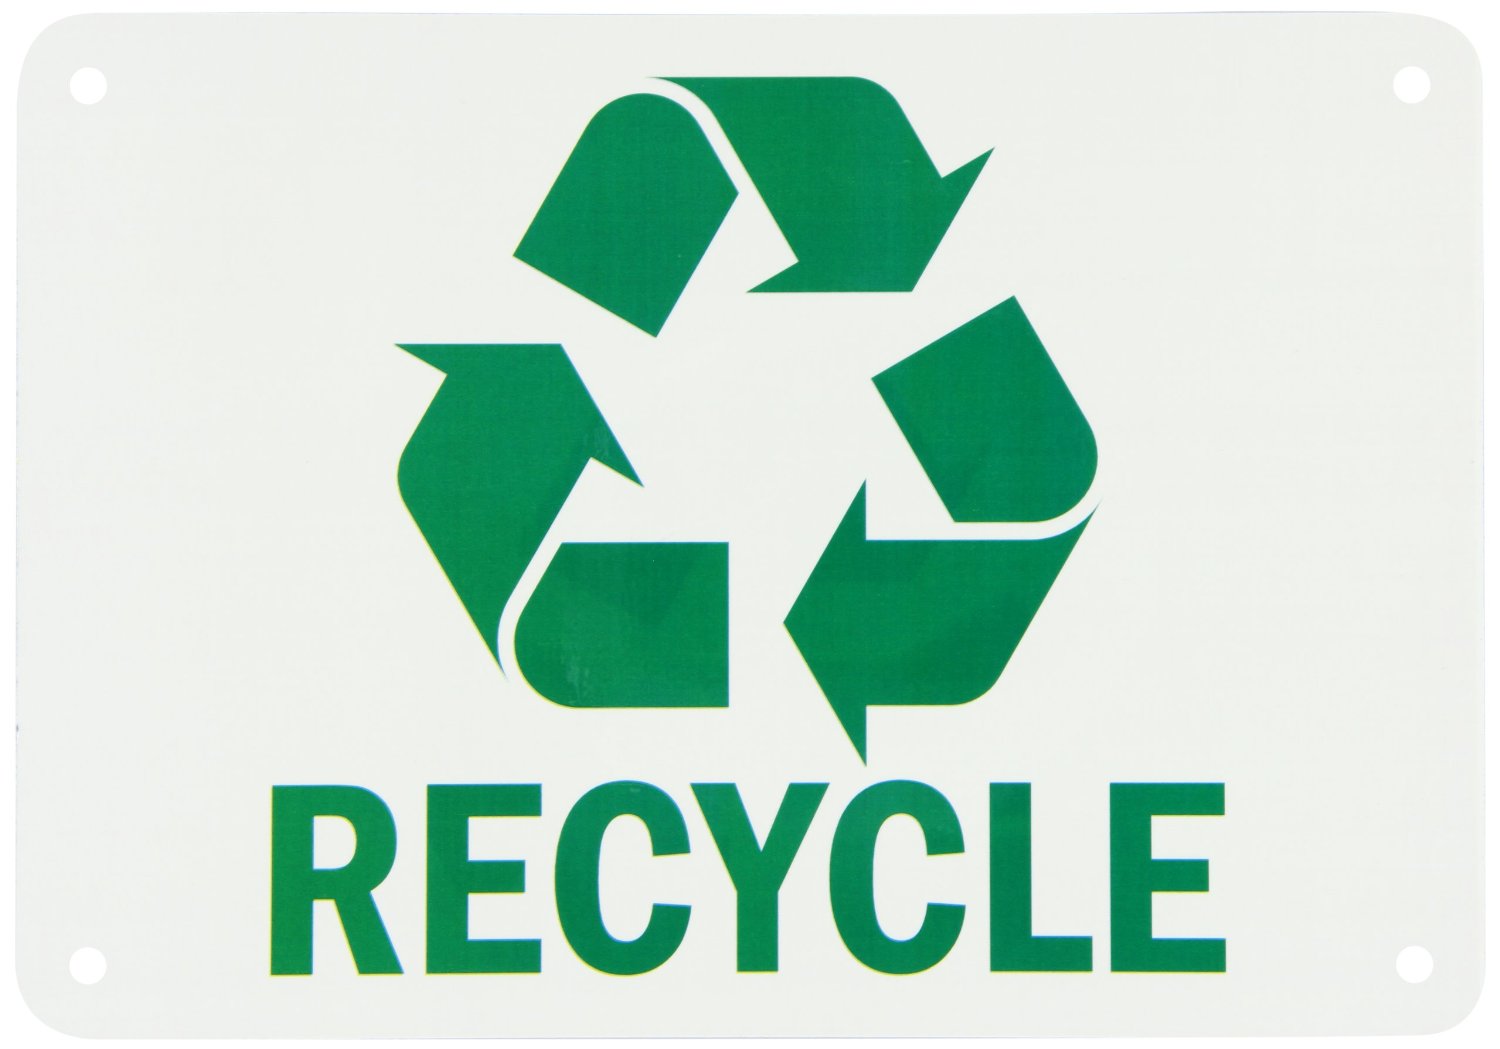 printable-recycle-symbol-that-are-exhilarating-barrett-website